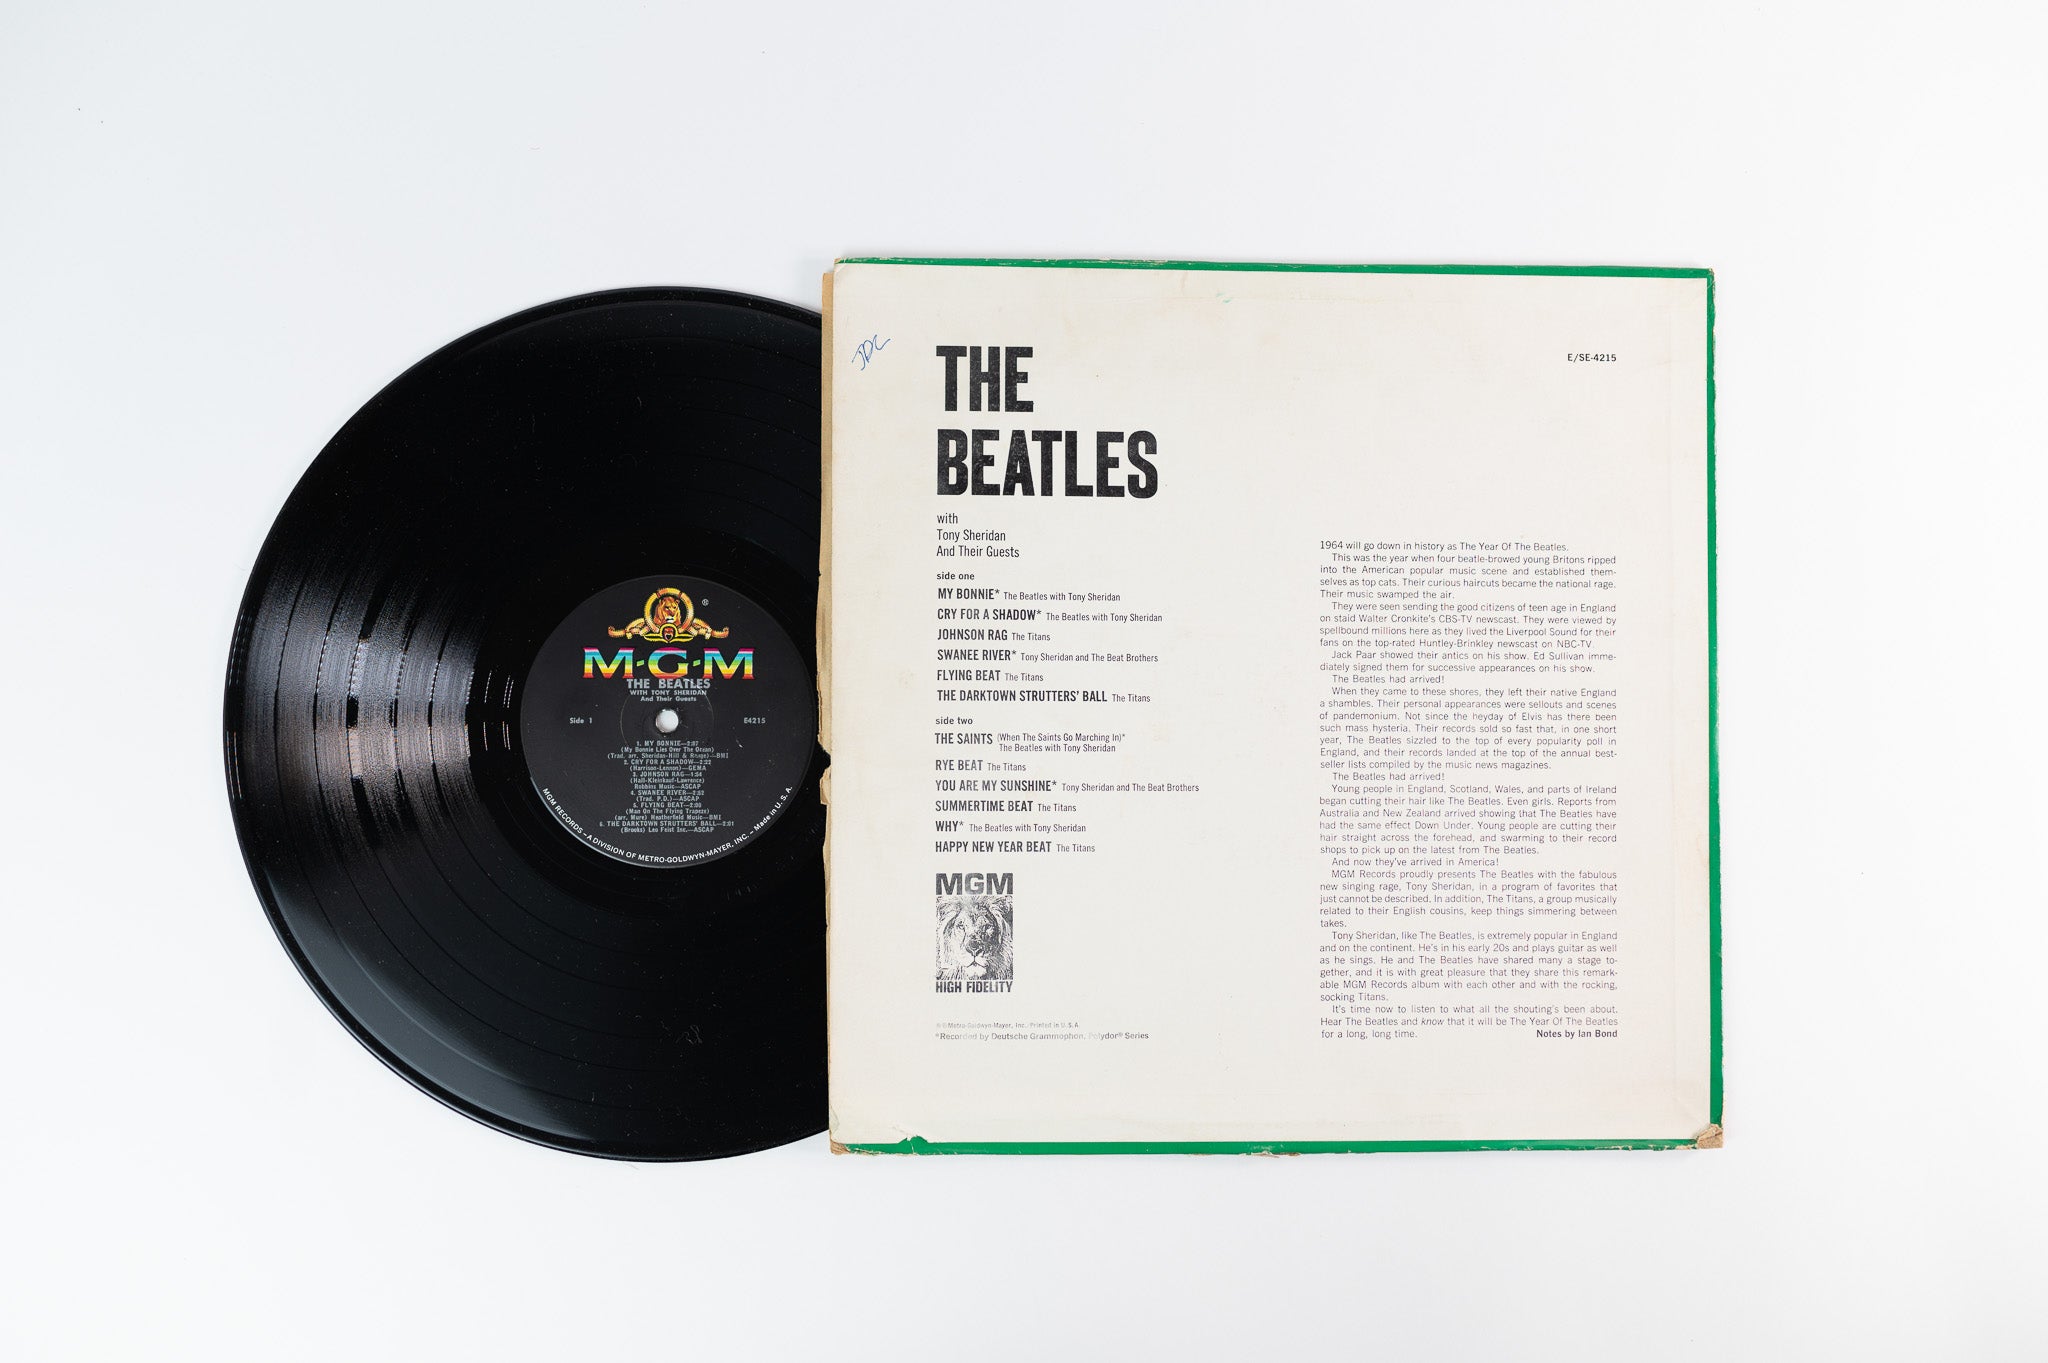 The Beatles - The Beatles With Tony Sheridan And Guests on MGM Mono